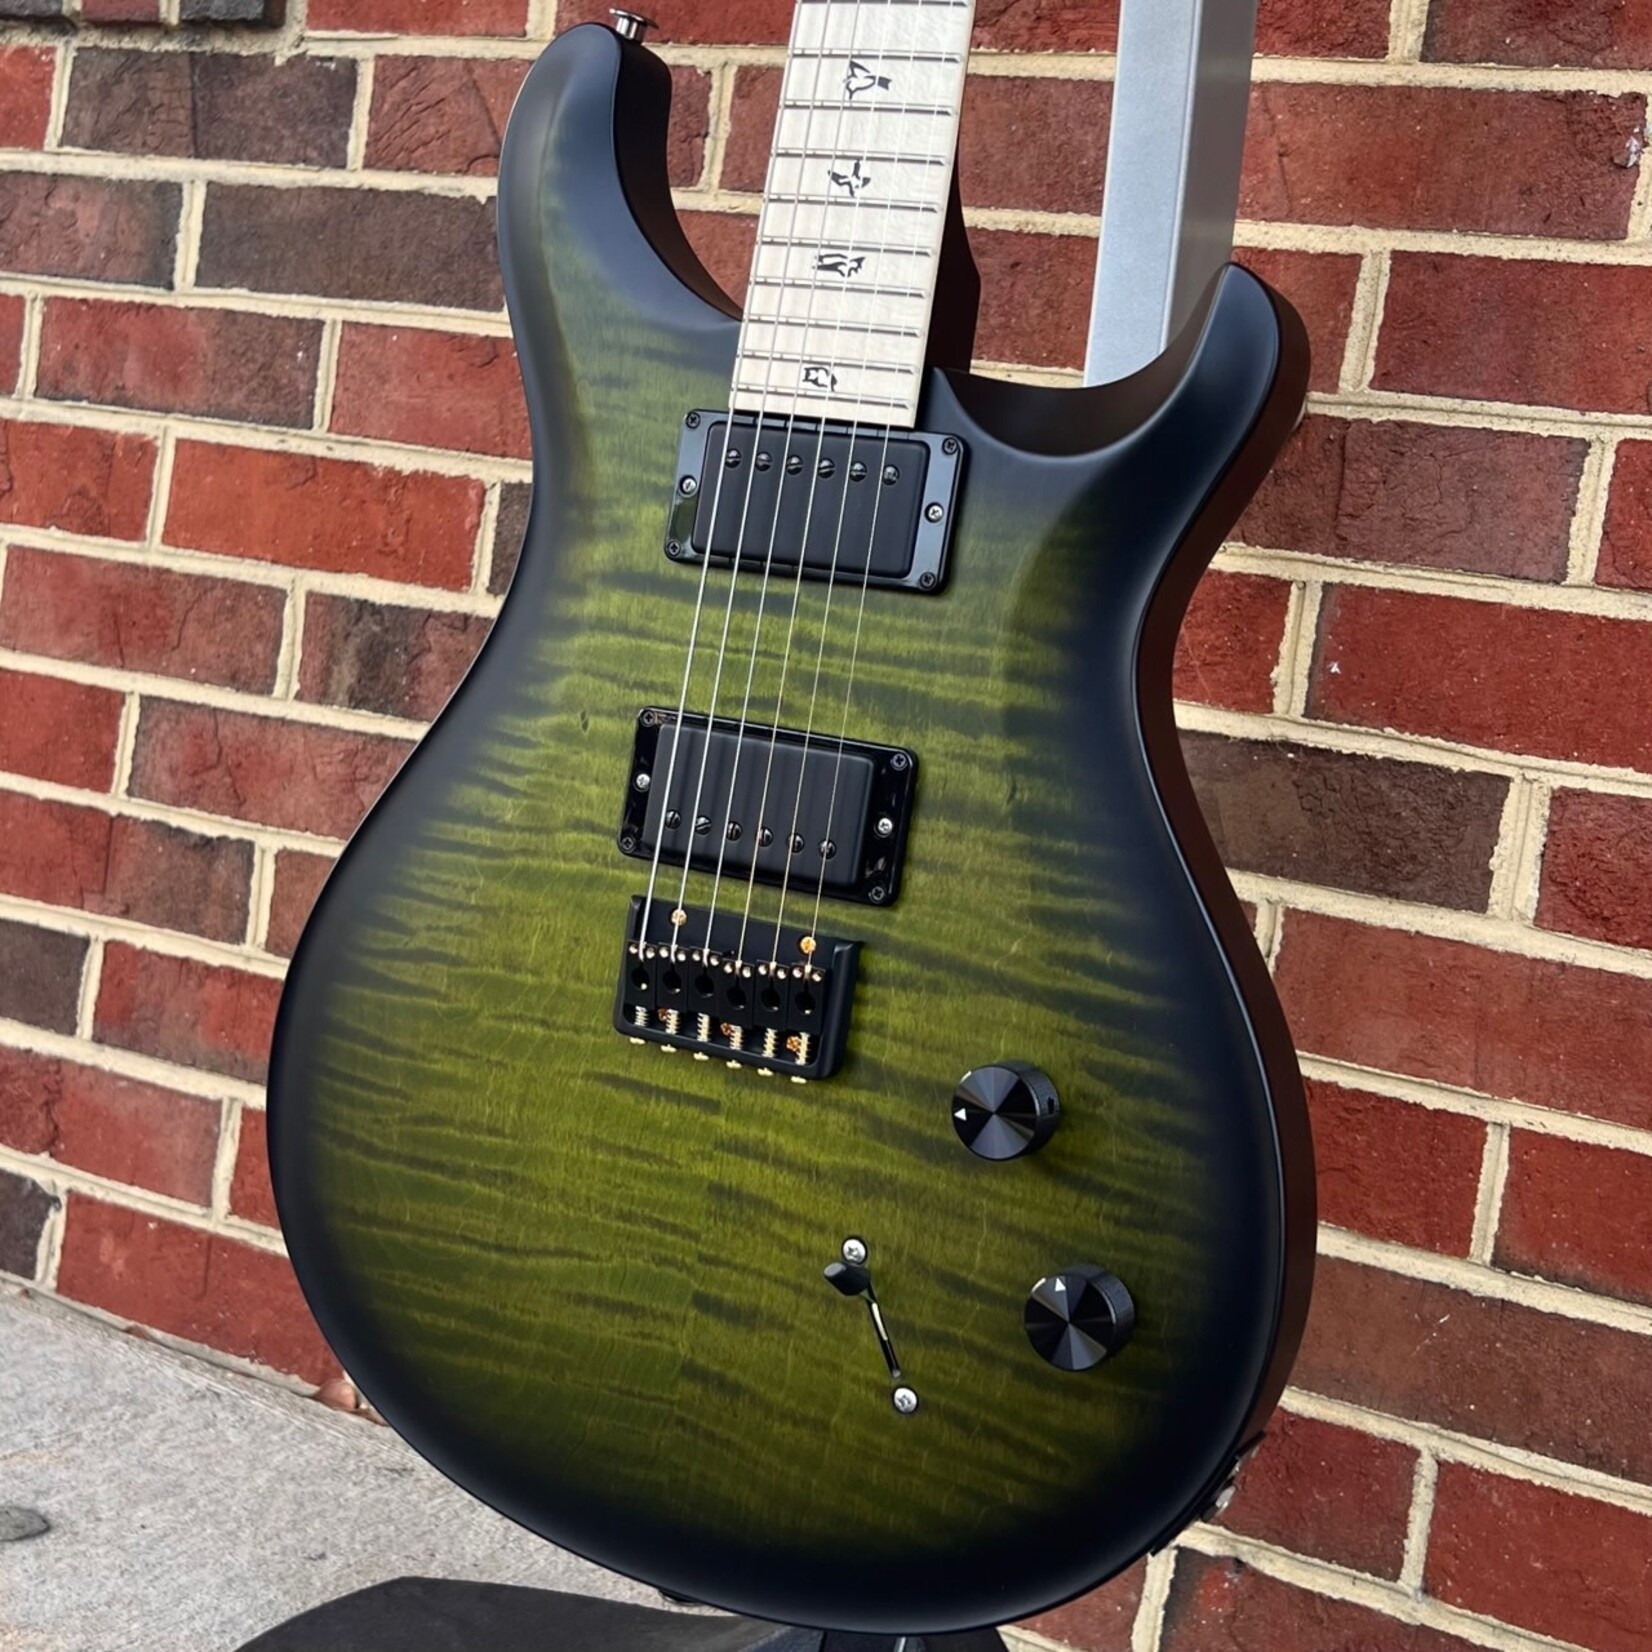 Paul Reed Smith Paul Reed Smith DW CE 24 Hardtail Limited Edition, Dustie Waring Signature Model, Jade Smokeburst, Mojotone Tomahawk Gen 2 Pickukps, ig Bag, SN# 0366221